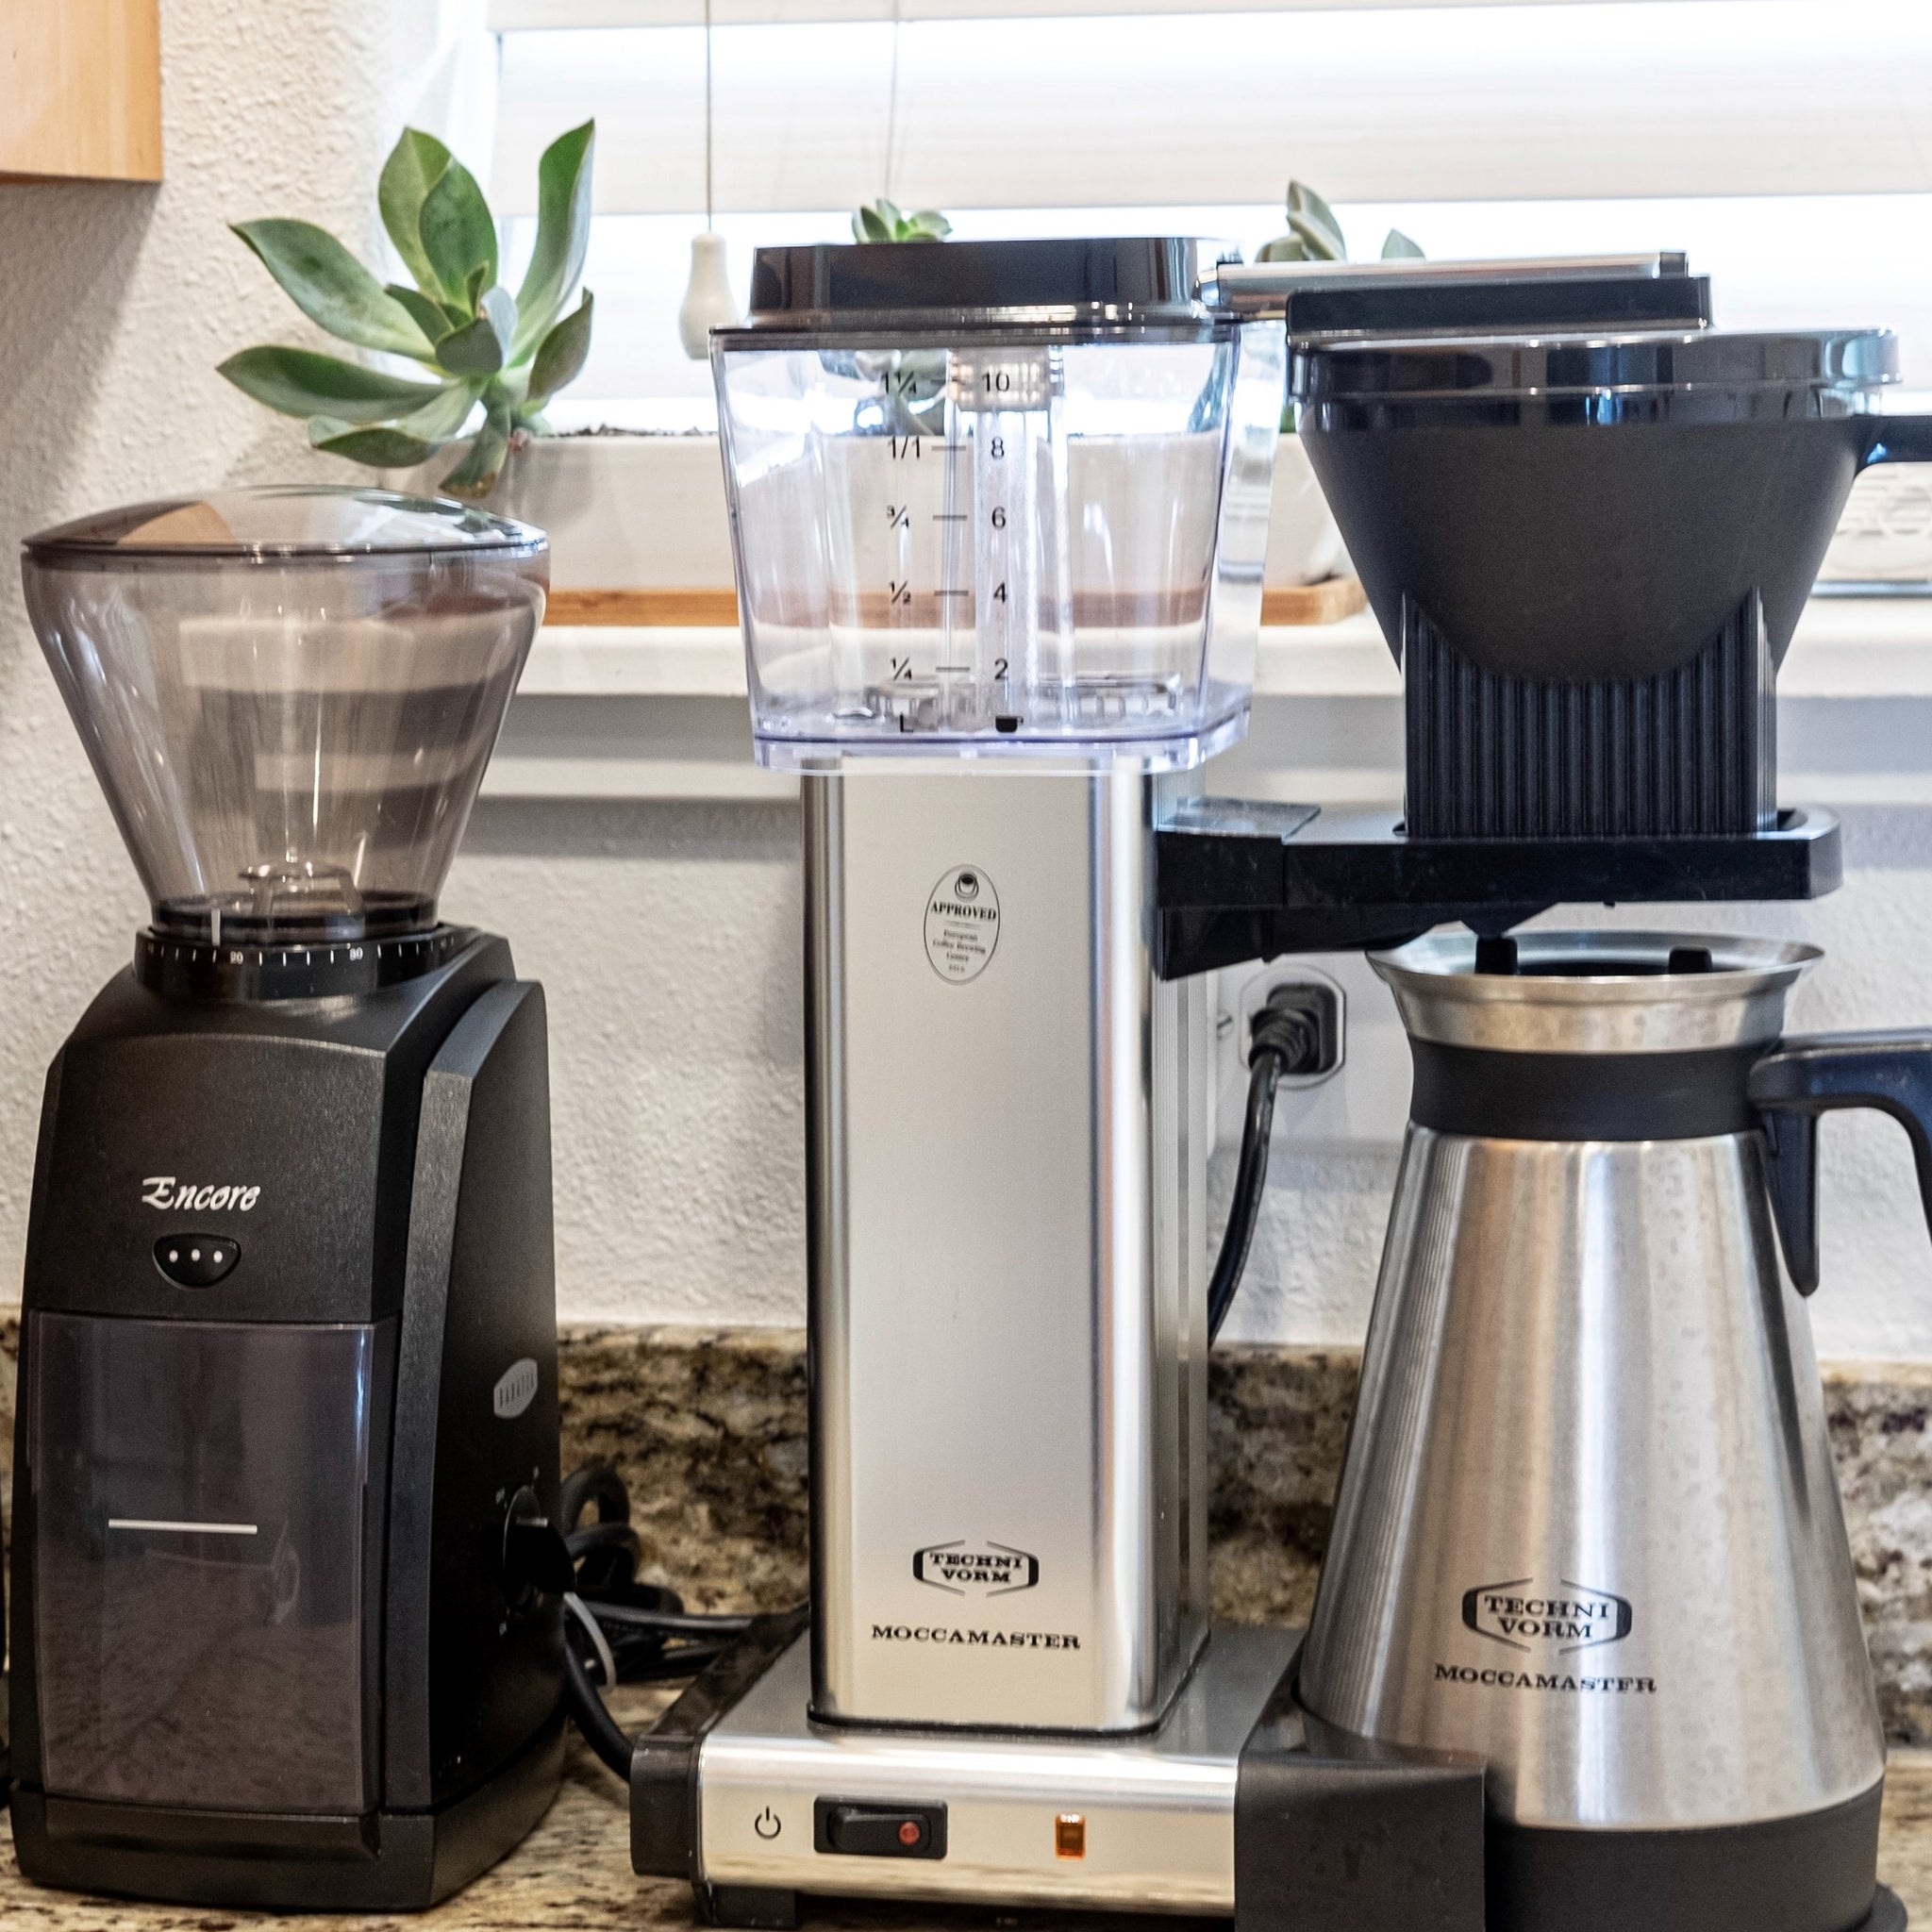 A grinder and coffee maker on a kitchen counter.